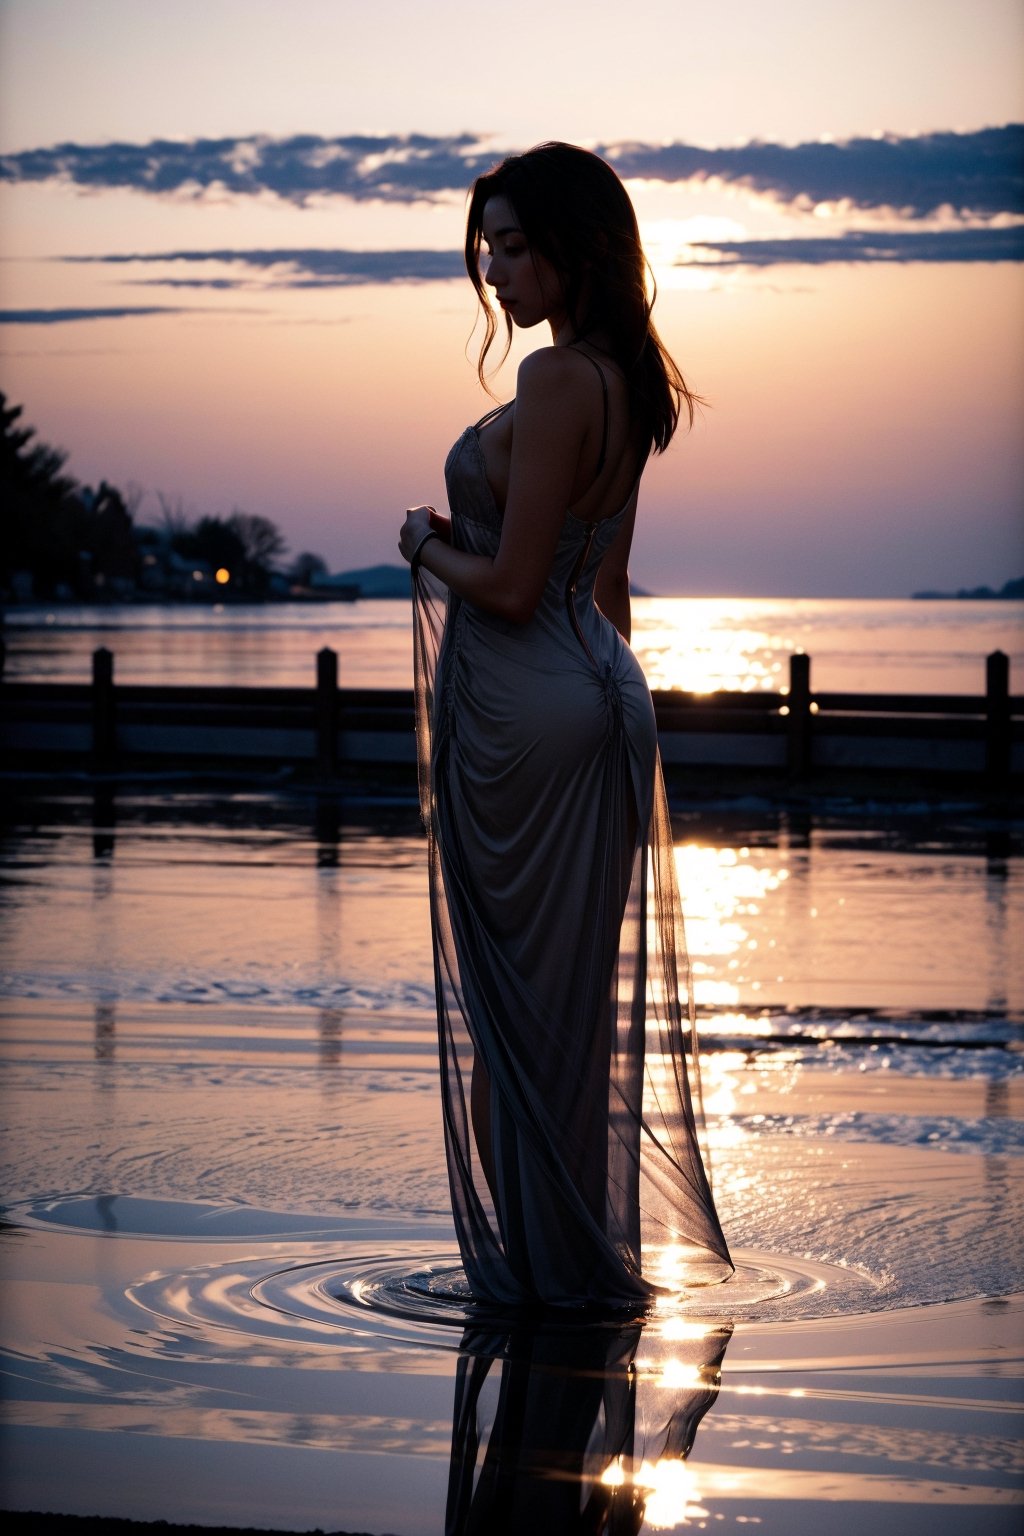 In the tranquil ambiance of a lakeside retreat at twilight, Isabella stands at the water's edge, framed by the soft, serene hues of the setting sun. The lake's surface reflects the sky's fading colors, creating a captivating mirror-like reflection.

Isabella's silhouette is striking against the twilight sky. She wears a flowing, diaphanous gown that catches the breeze, emphasizing her graceful form. Her hair is gently tousled by the evening wind, adding to the ethereal effect.

As the photographer captures the scene with a camera equipped with a telephoto lens, they focus on the interplay of light and shadow. Isabella's figure is a dark, captivating silhouette against the glowing horizon, while her reflection shimmers like a mirage on the tranquil water's surface.

The resulting photograph is a study in contrast, a harmonious blend of silhouette and reflection. Isabella stands as a mysterious figure against the twilight, her presence accentuated by the serene beauty of the natural setting. It's an image that evokes a sense of contemplation and wonder, where the boundaries between reality and reflection blur in the enchanting twilight hour.